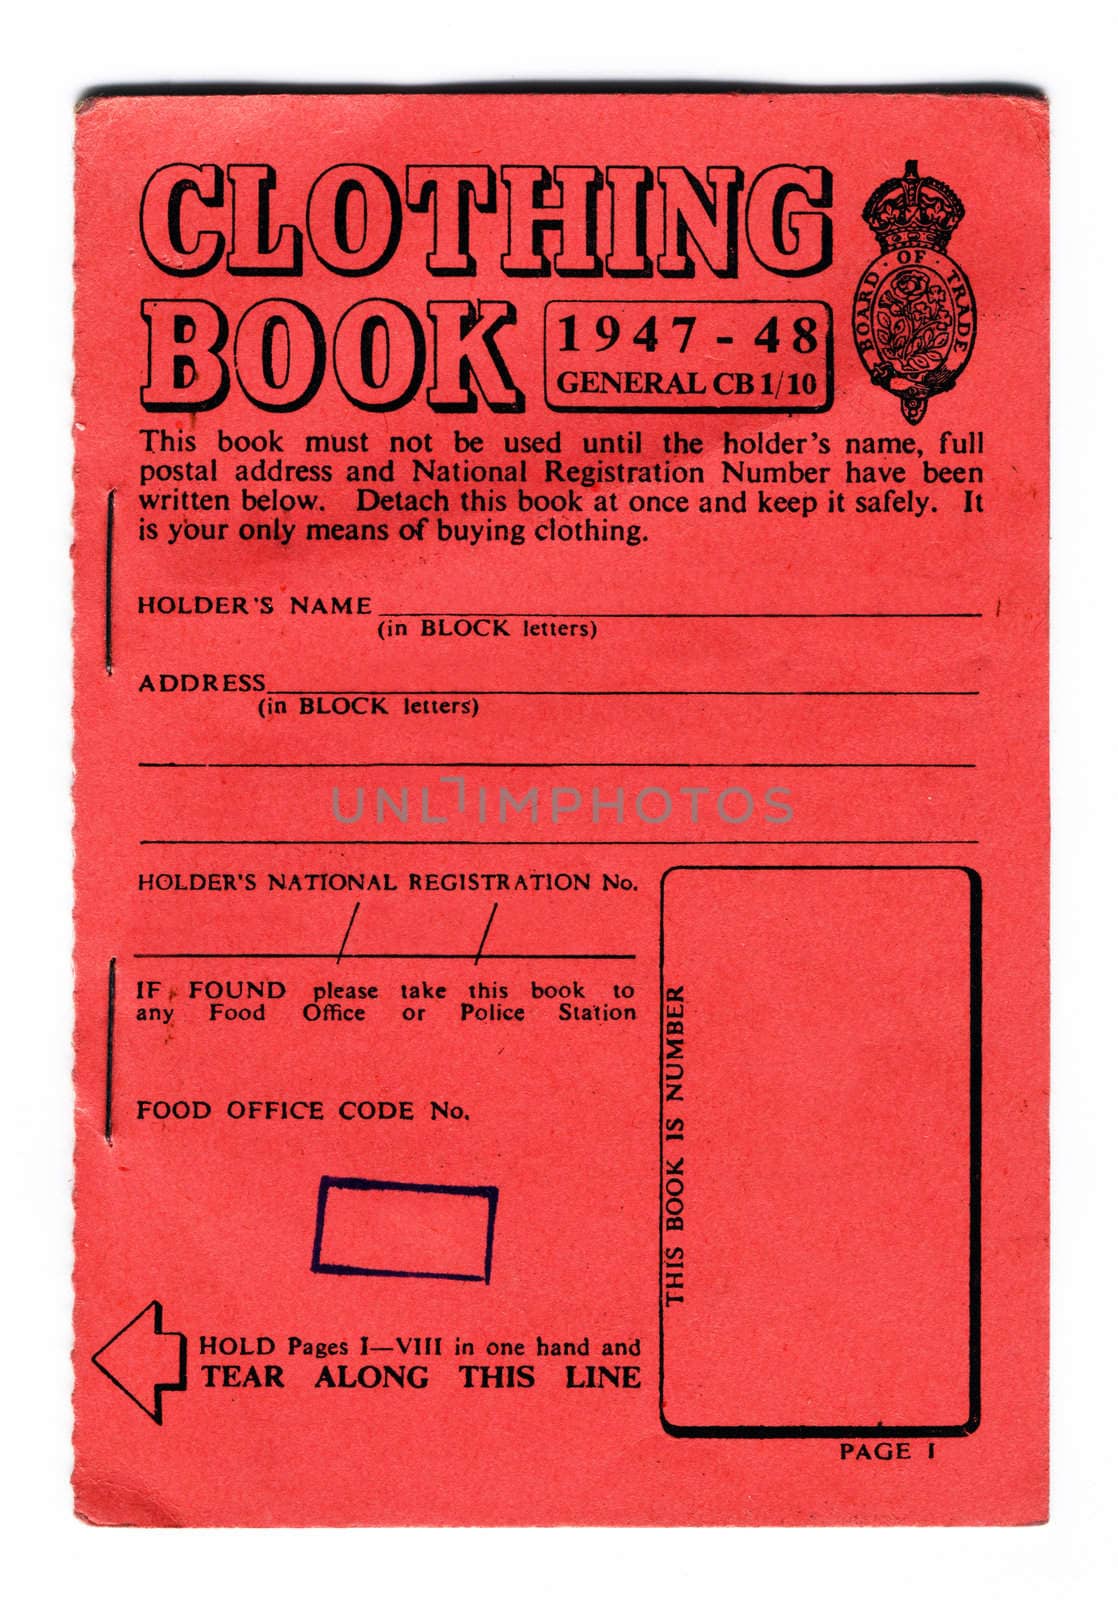 British clothing ration book from the period 1947 to 1948. by tommroch